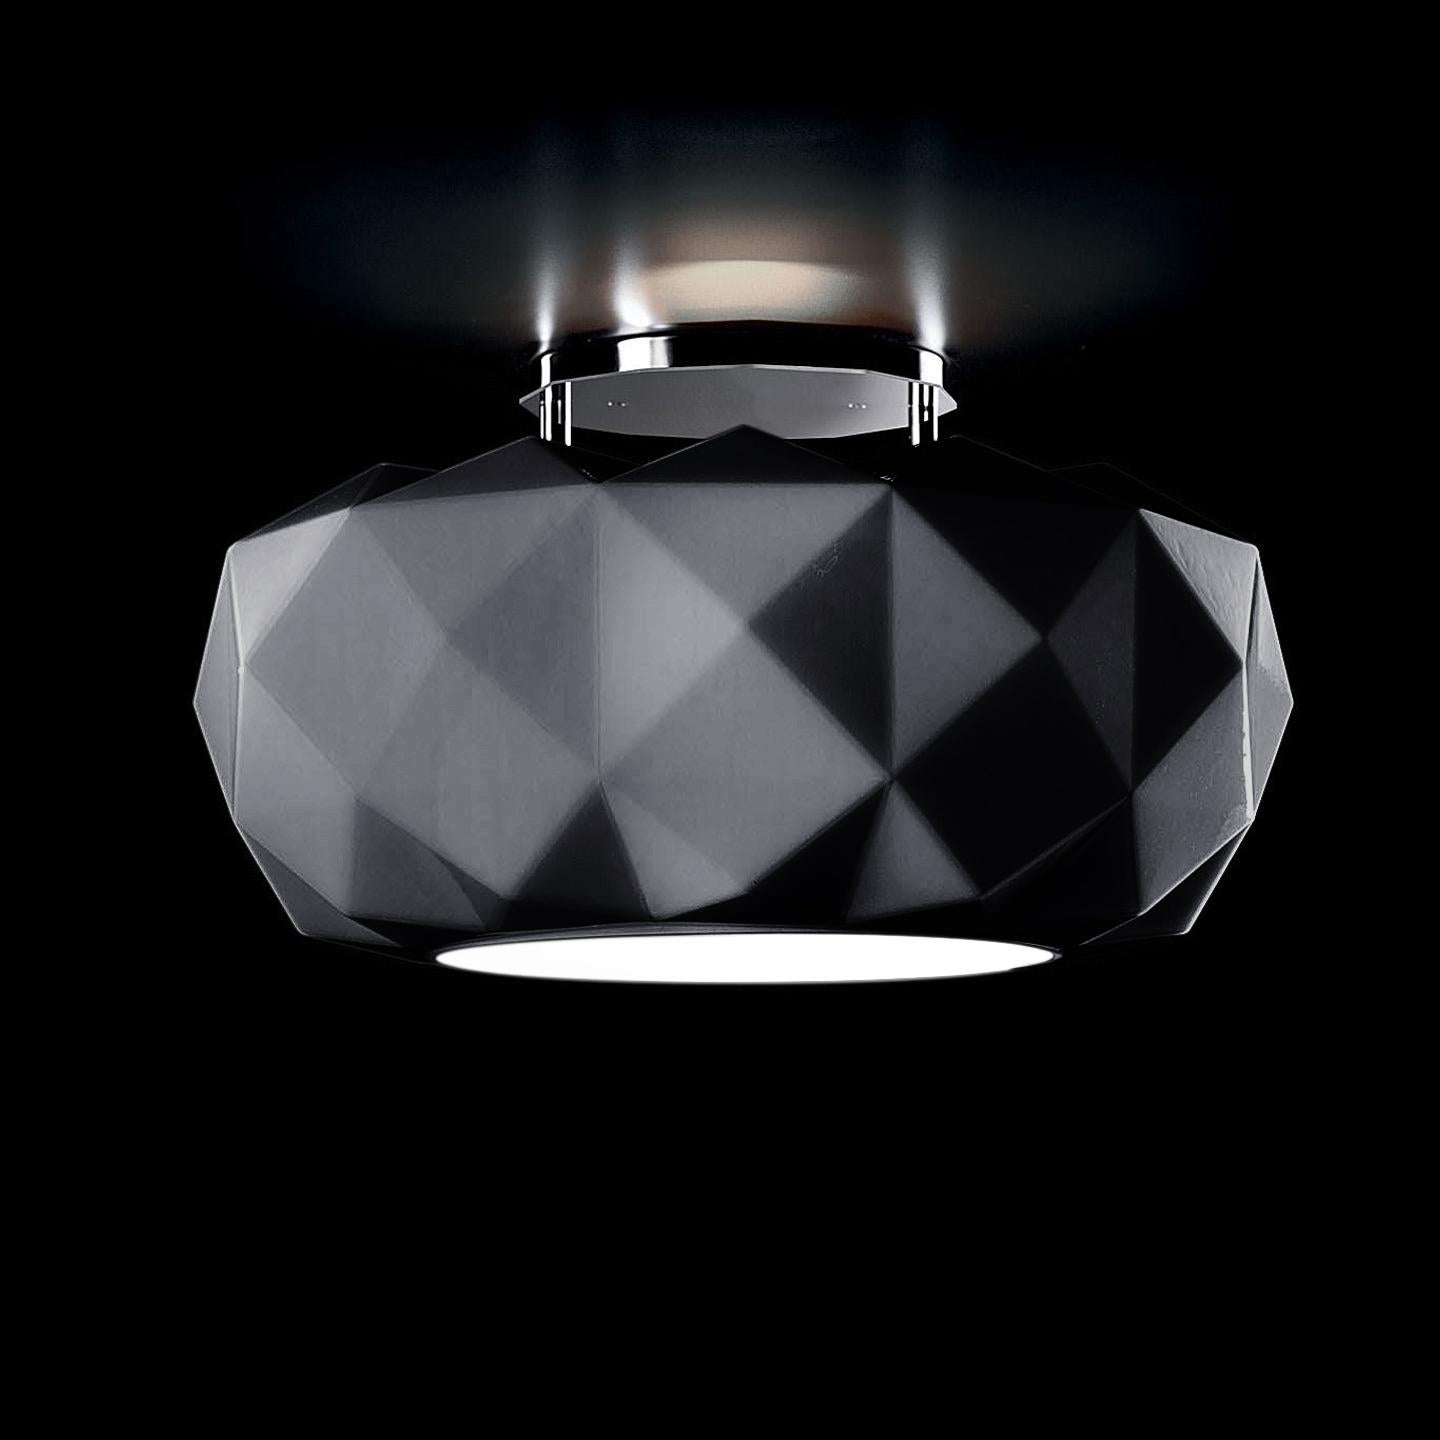 Leucos Deluxe PL 50 Flush Mount in Matte Black and Chrome by Archirivolto